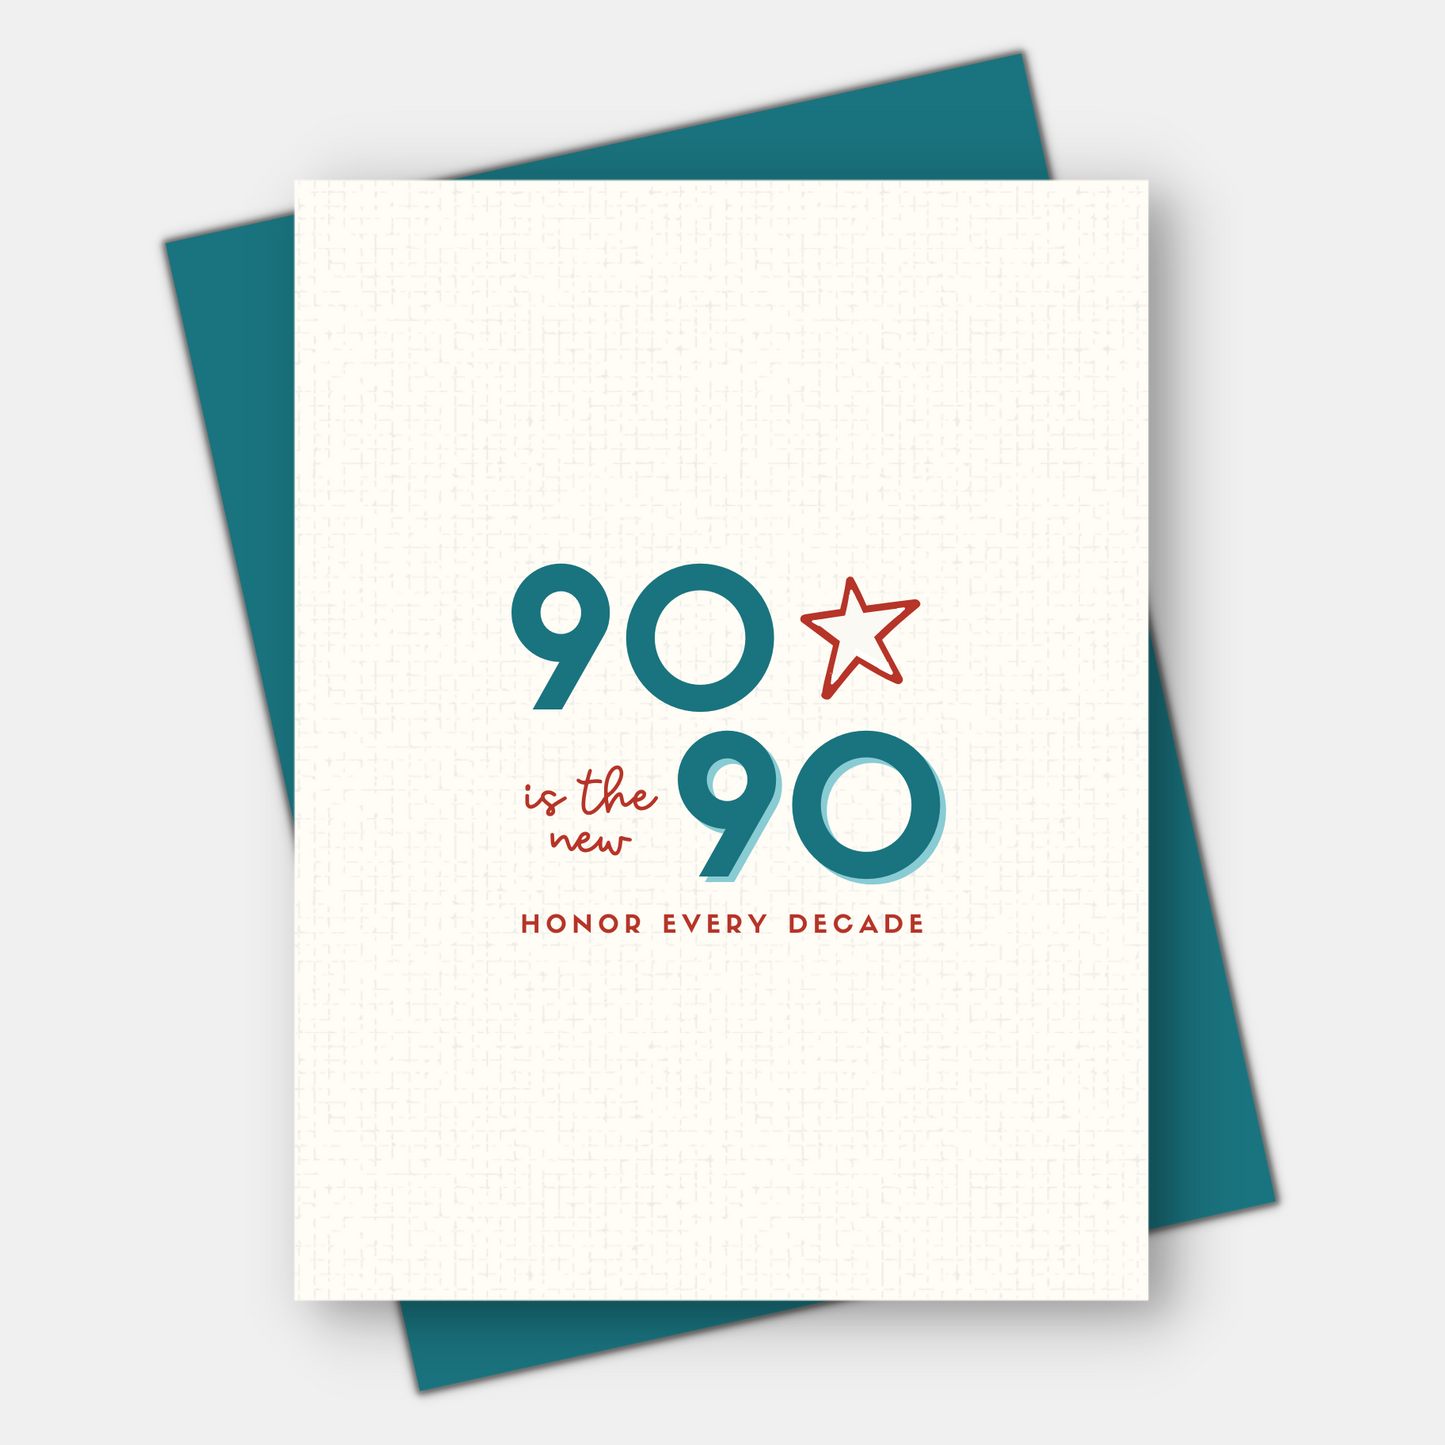 70 is the new 70, milestone birthday card for 50-100 decades